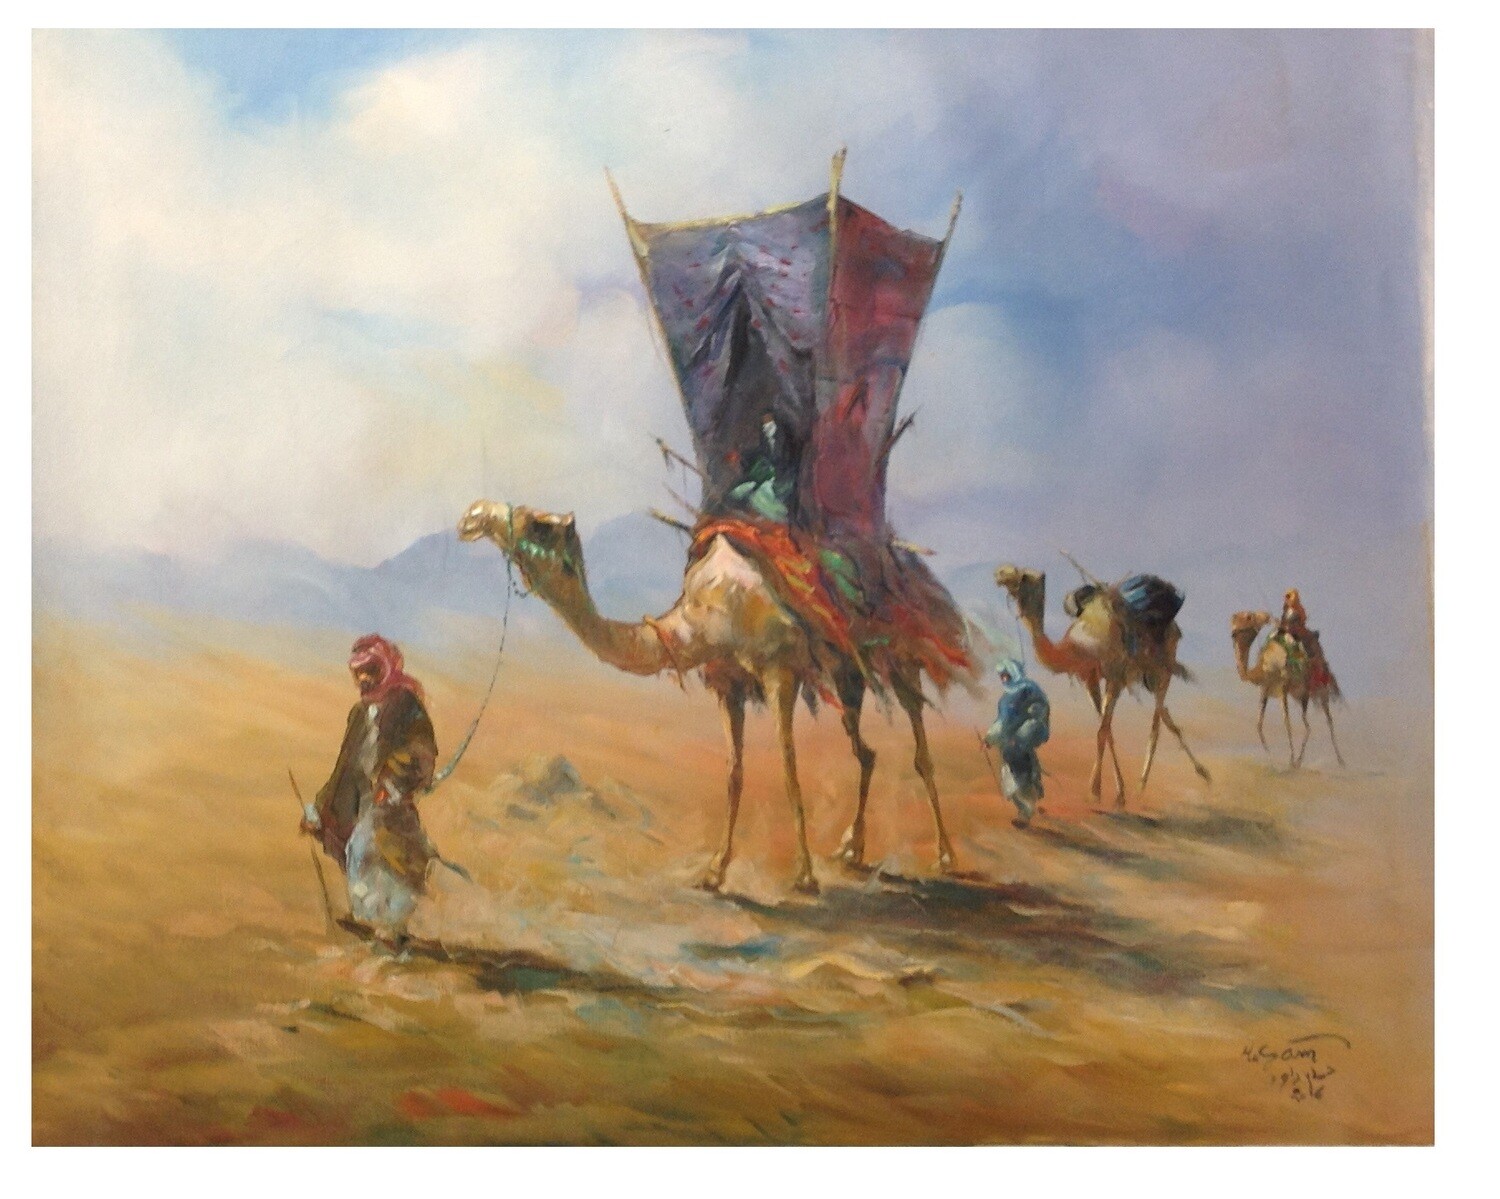 Desert Nomads &amp; Camels Oil painting Original Hand Painted Canvas